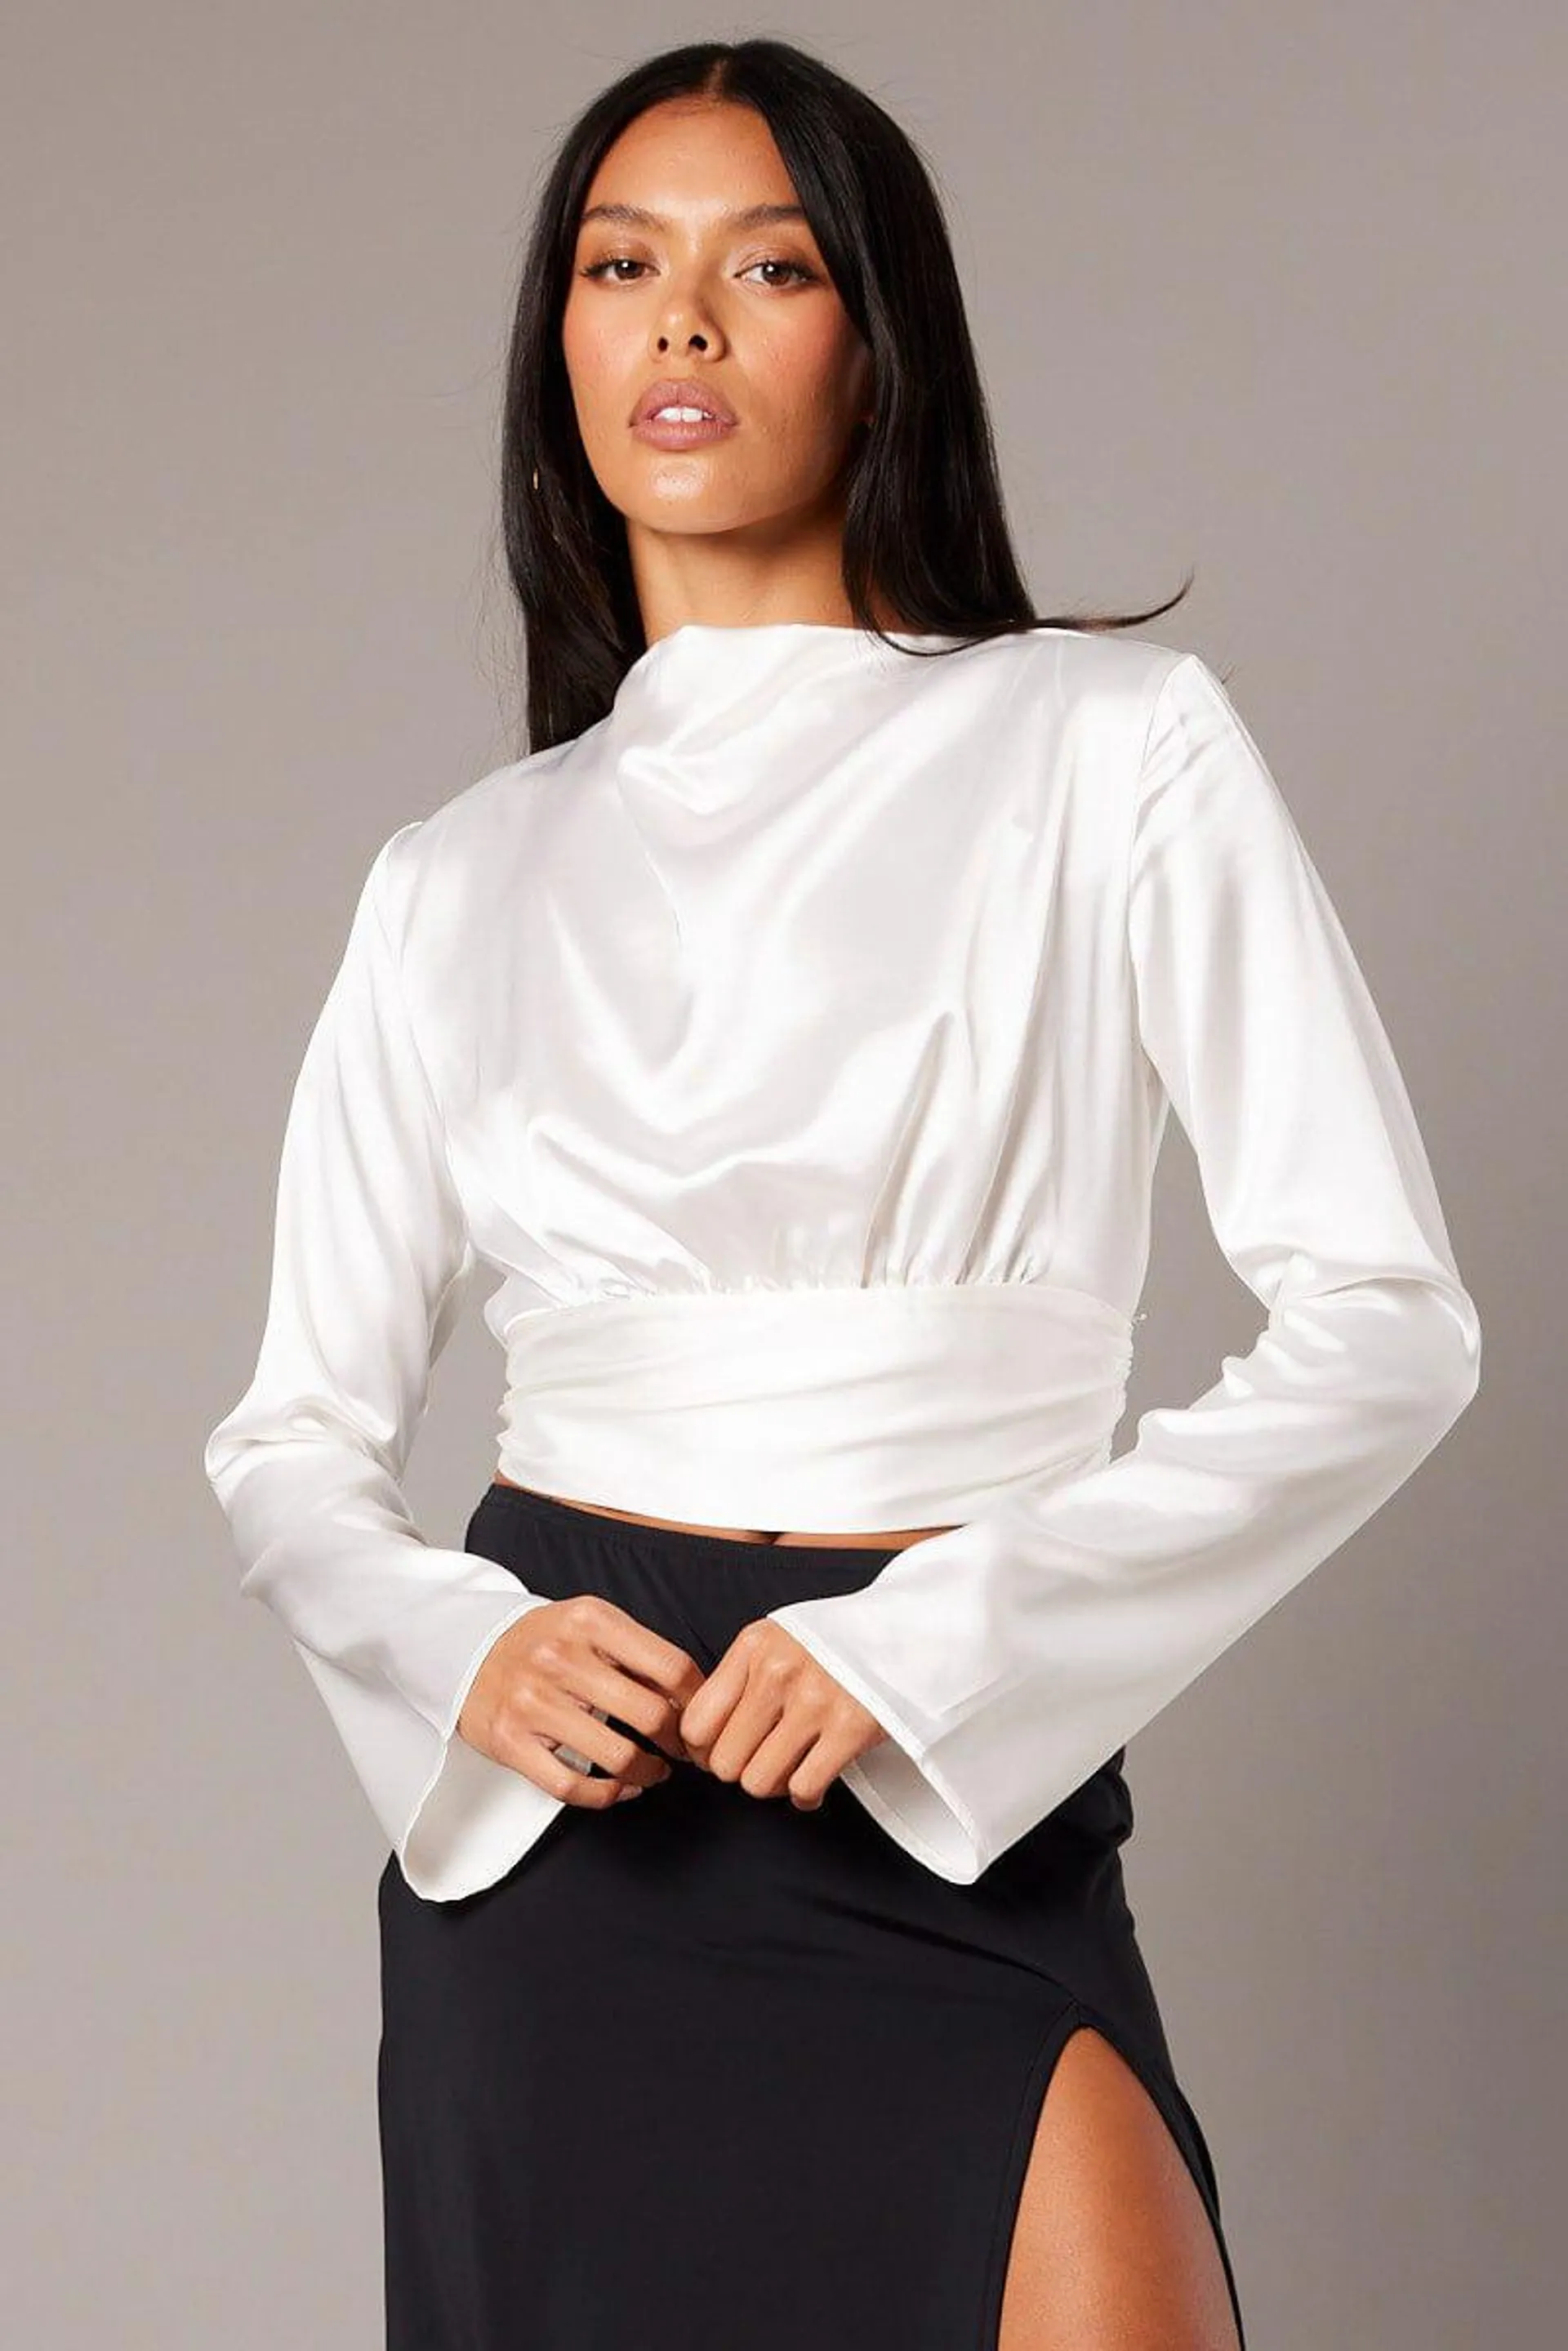 White Backless Top Flared Sleeve High Neck Blouse